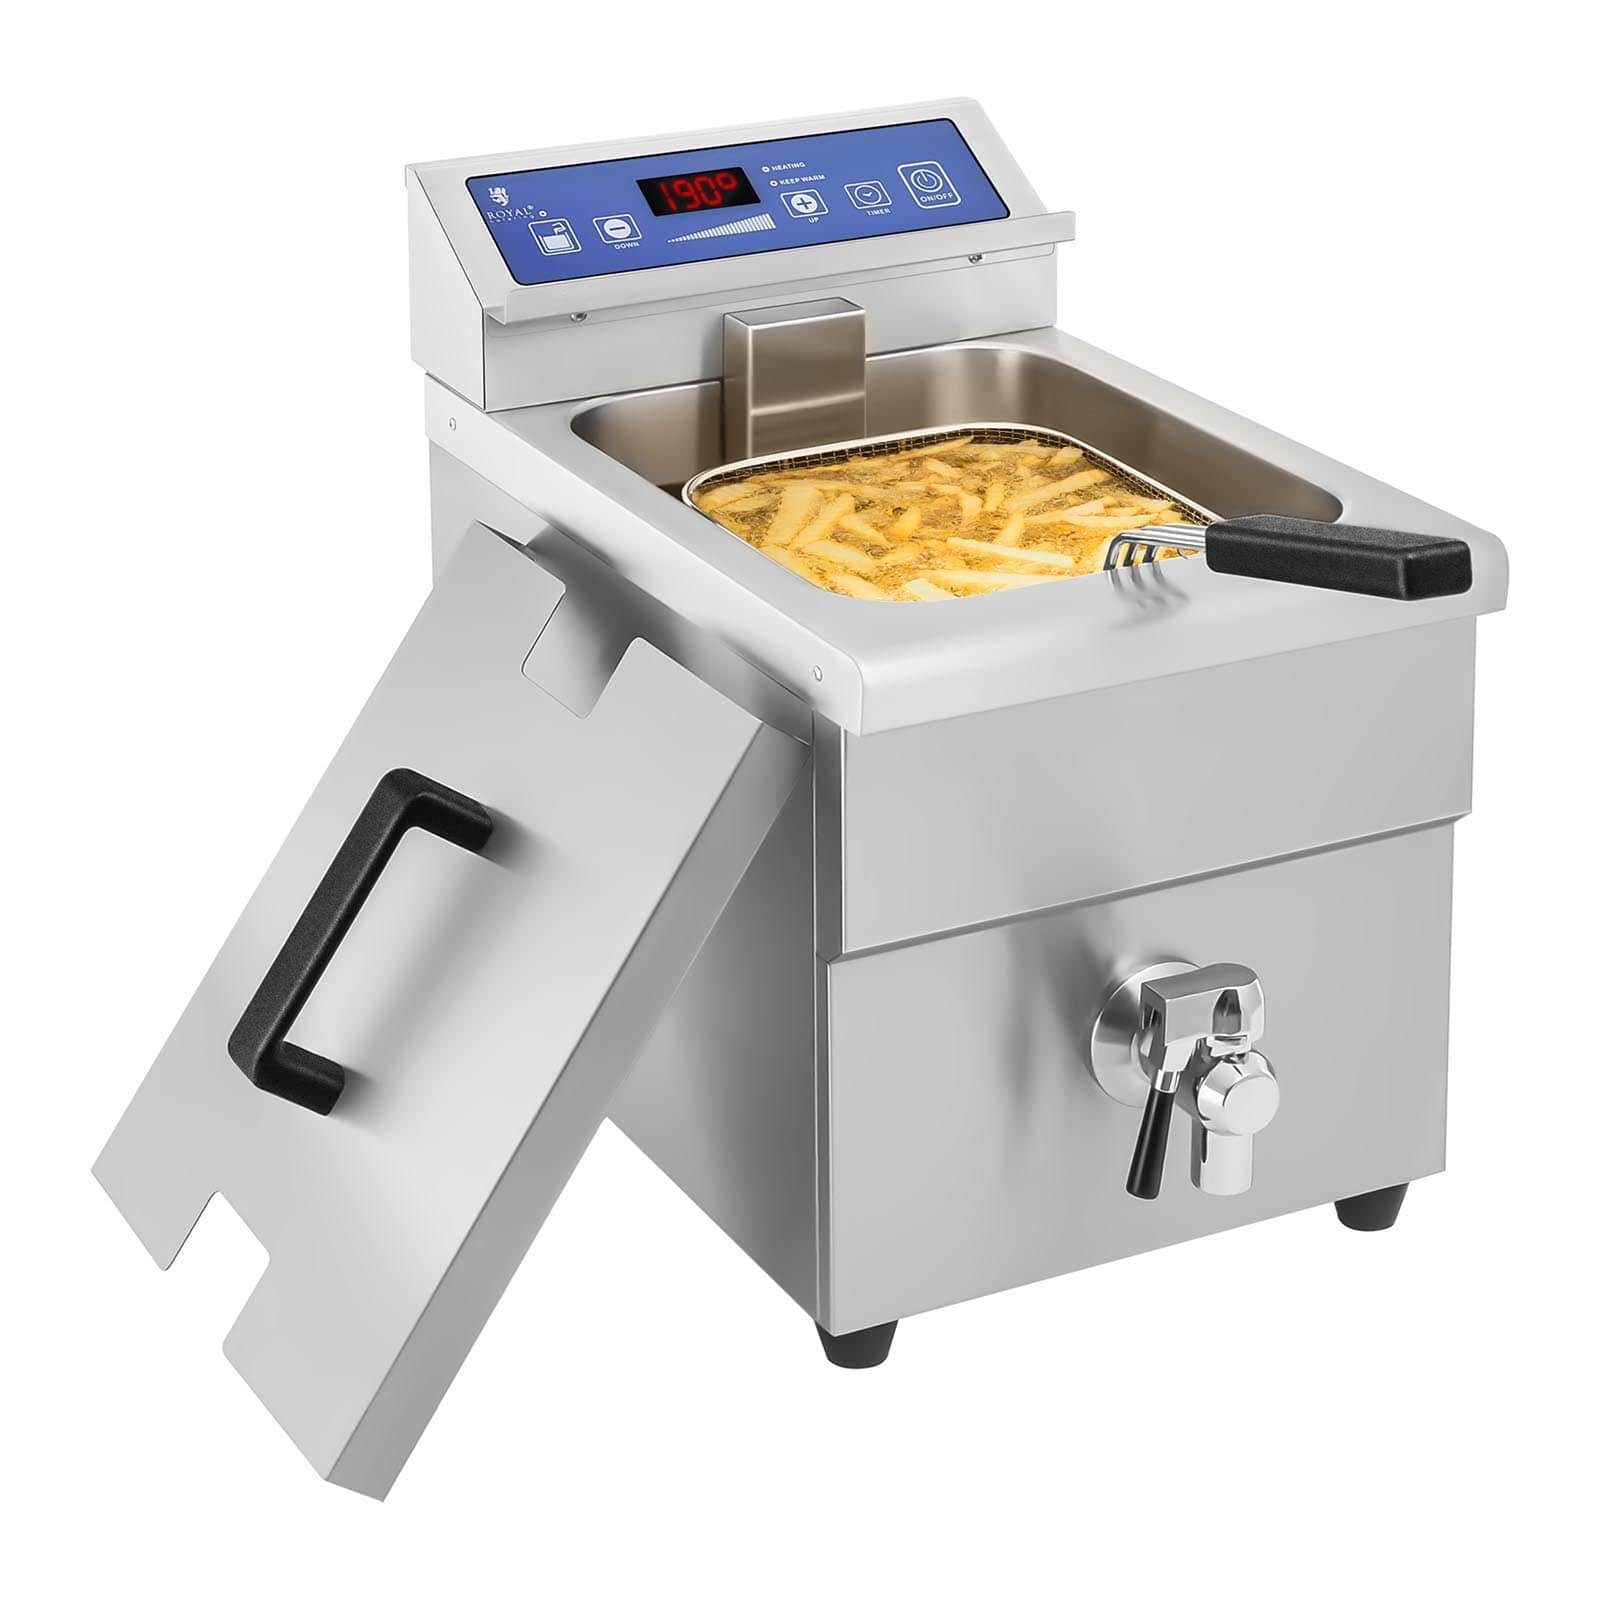 Royal Catering Fritteuse Induktionsfritteuse 10 L Friteuse Fritteuse Fritöse Elektro, 3500 W